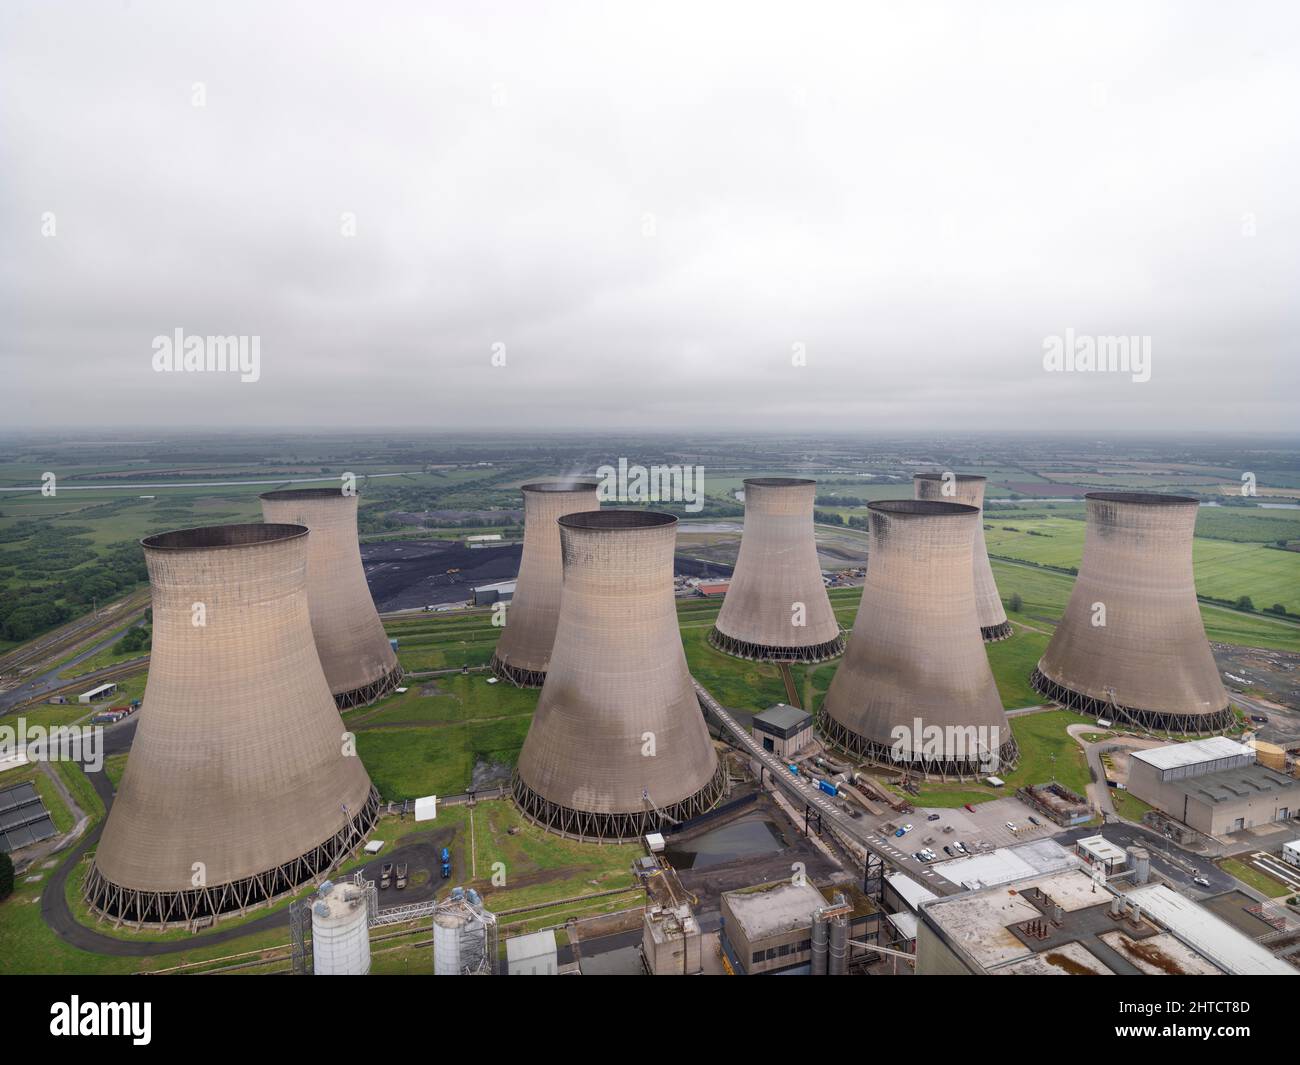 Cottam Power Station, Outgang Lane, Cottam, Treswell, Bassetlaw, Nottinghamshire, 2018. General view looking east across the power station's cooling towers from the top of the stack. Stock Photo